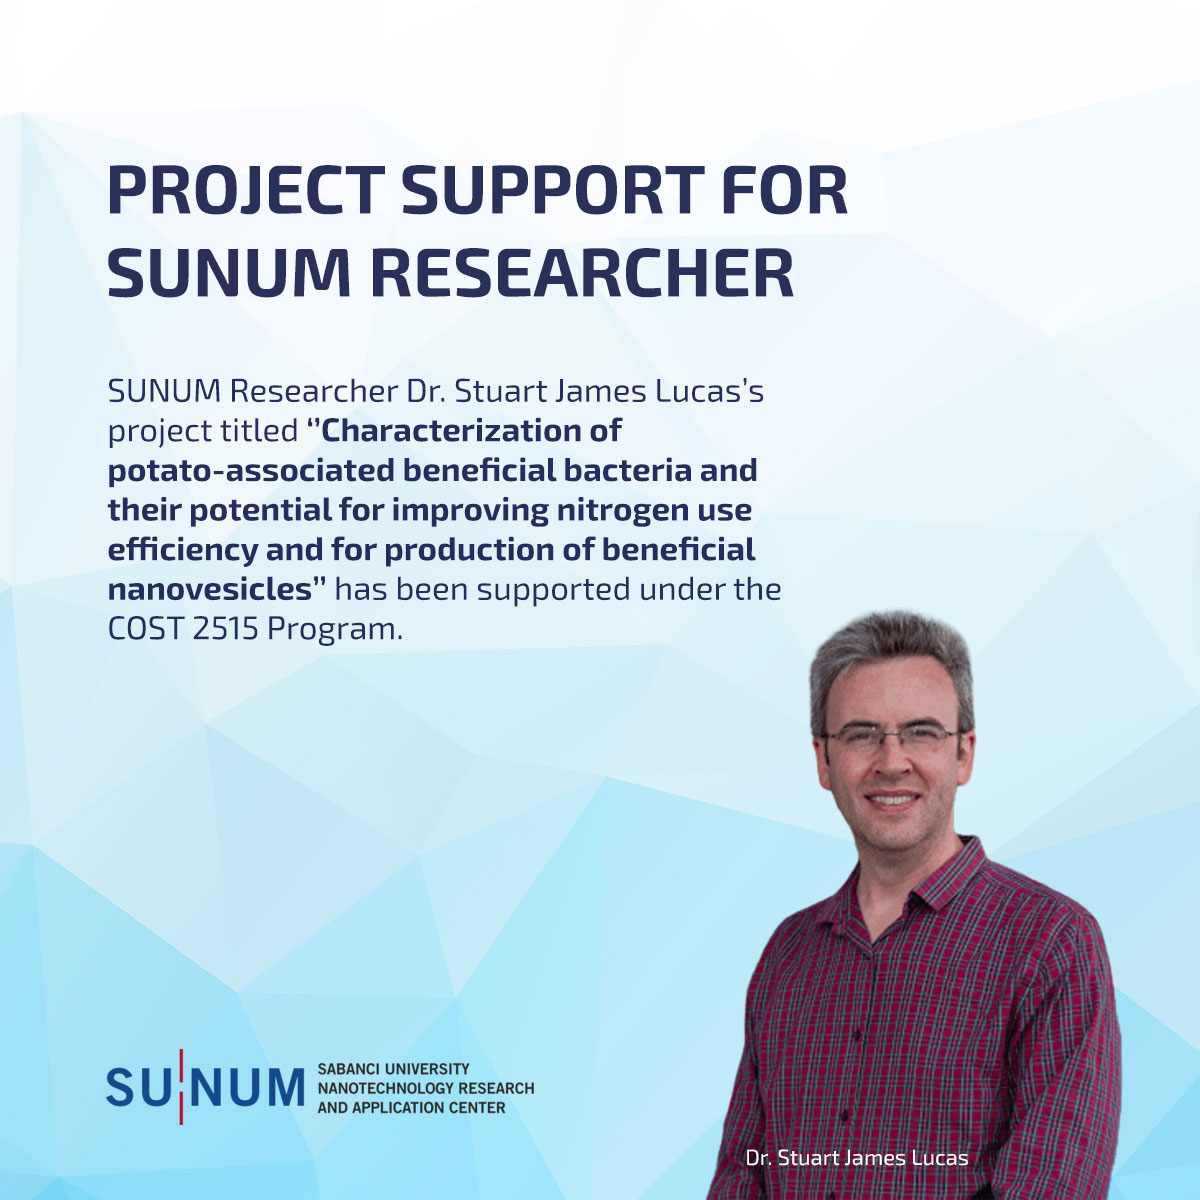 Project Support for SUNUM Researcher